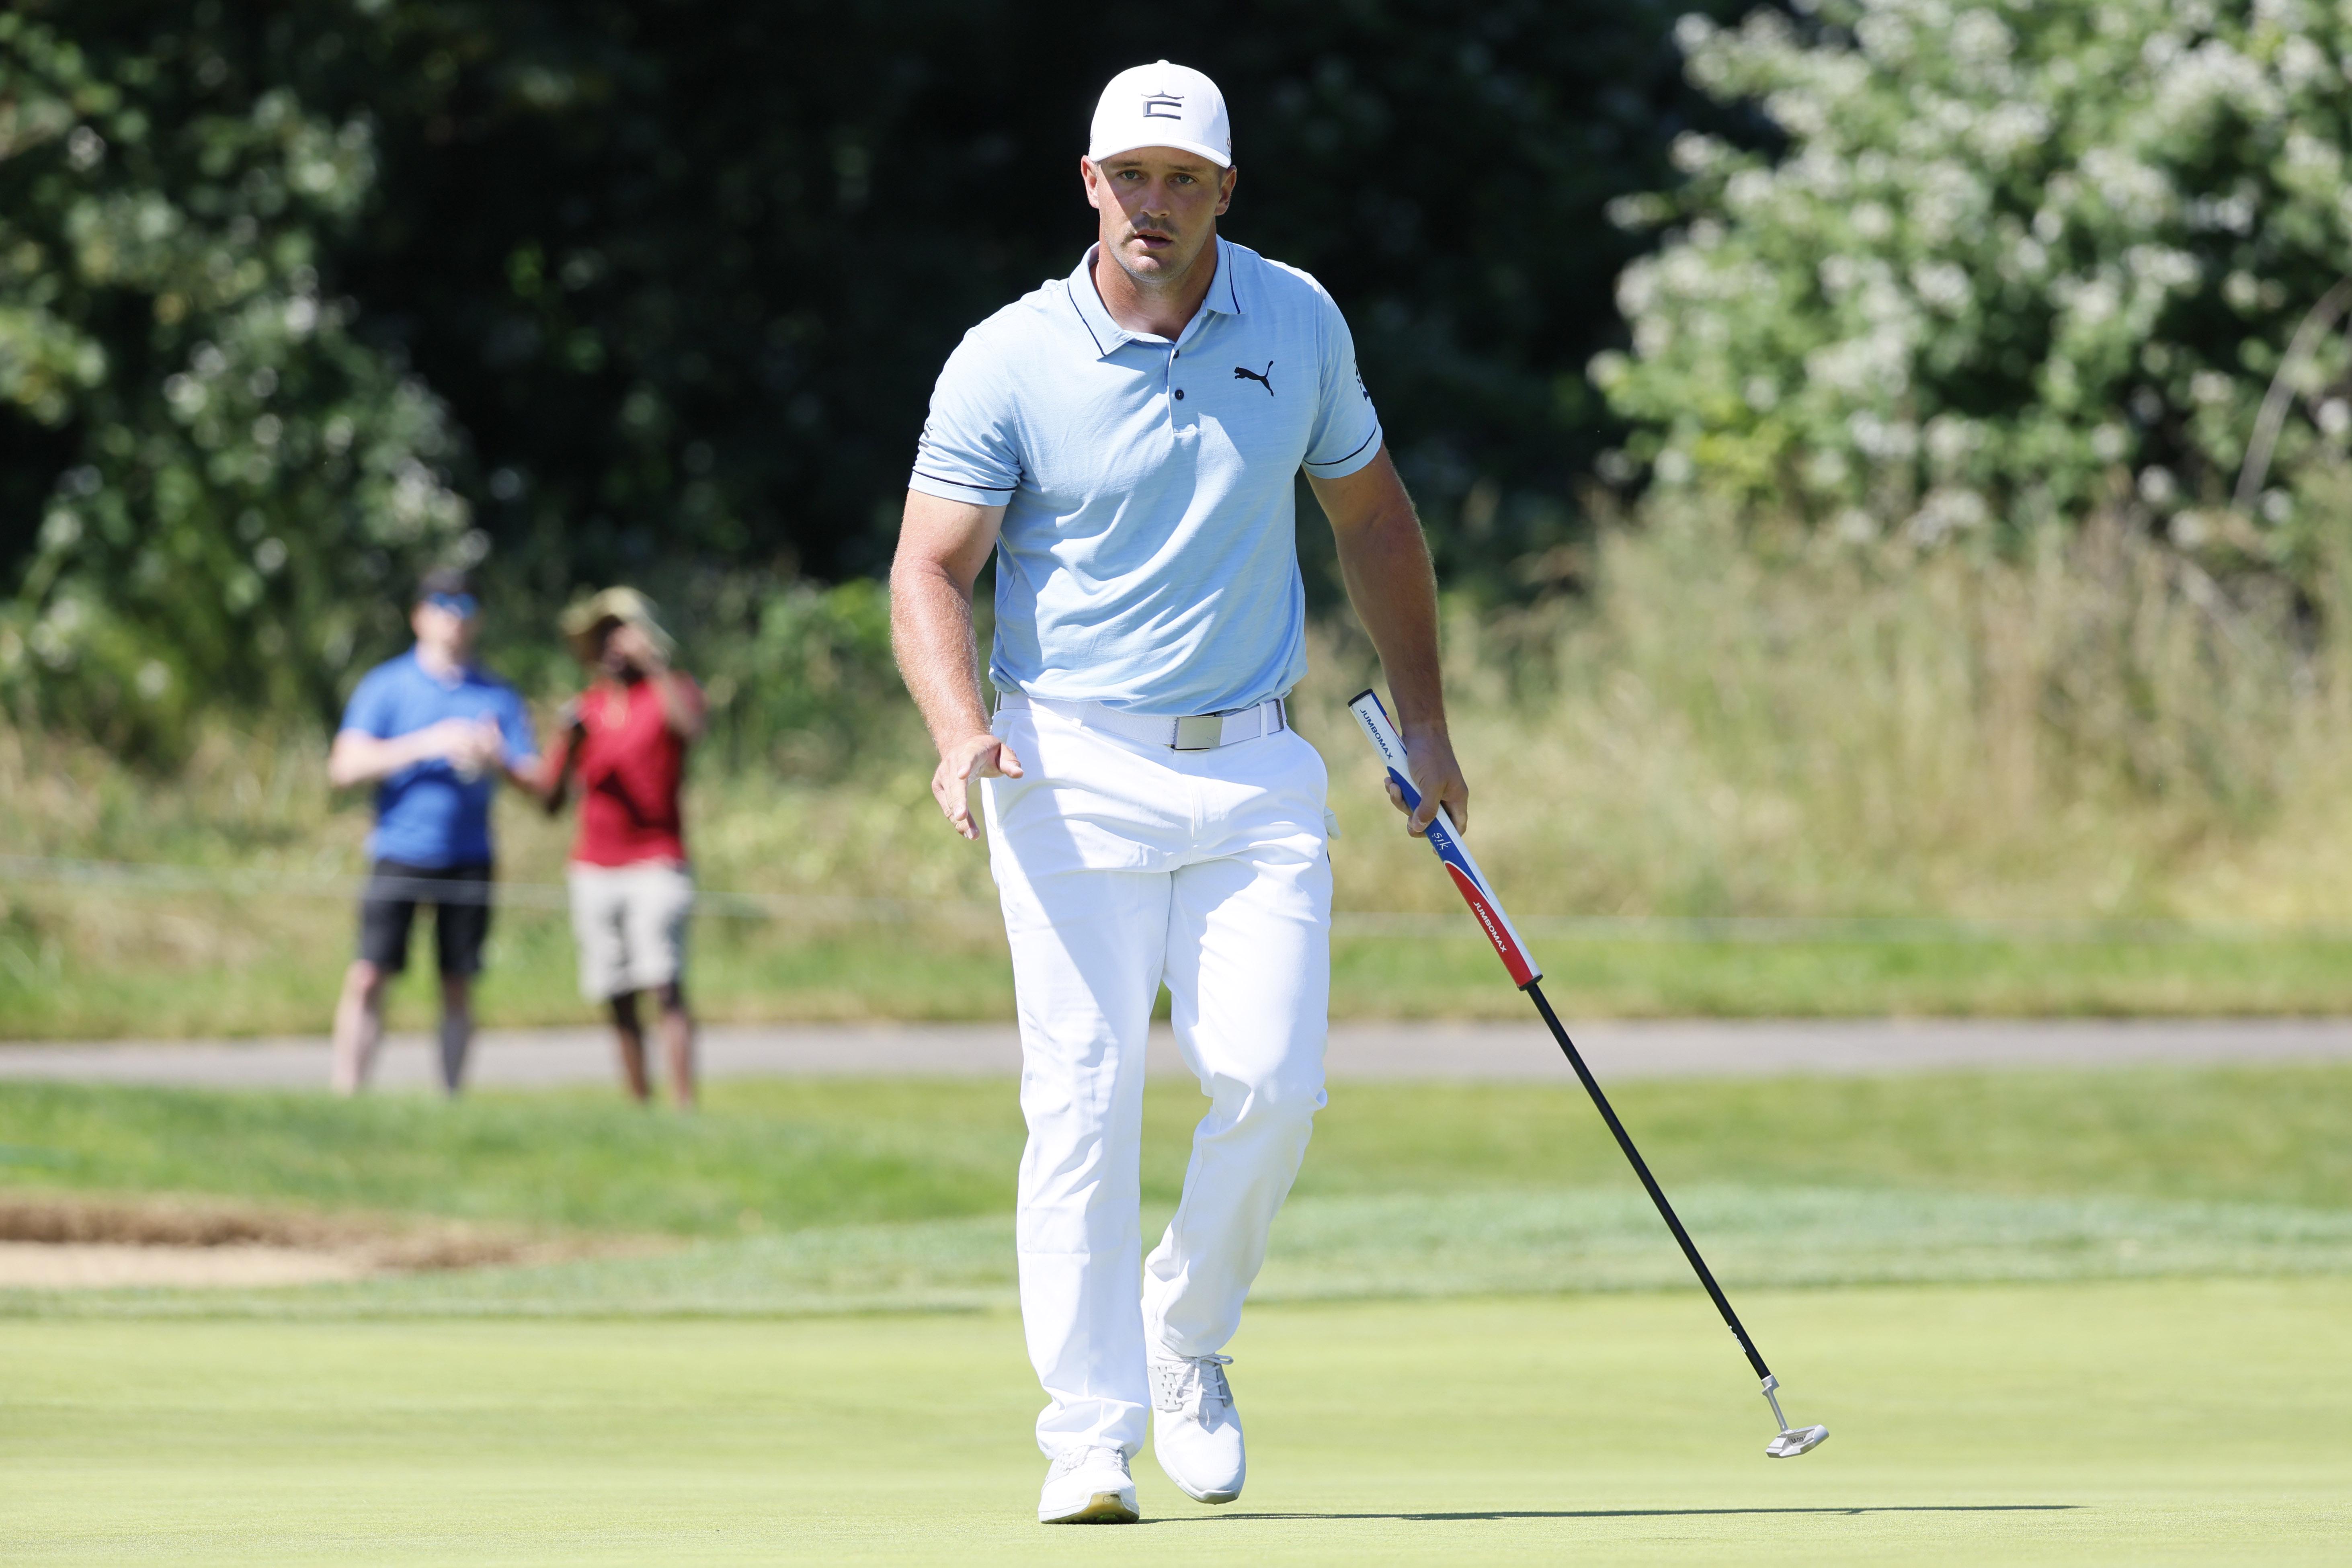 Bryson Dechambeau Open Championship 2022 Odds, History, Predictions and How to Watch FanDuel Research